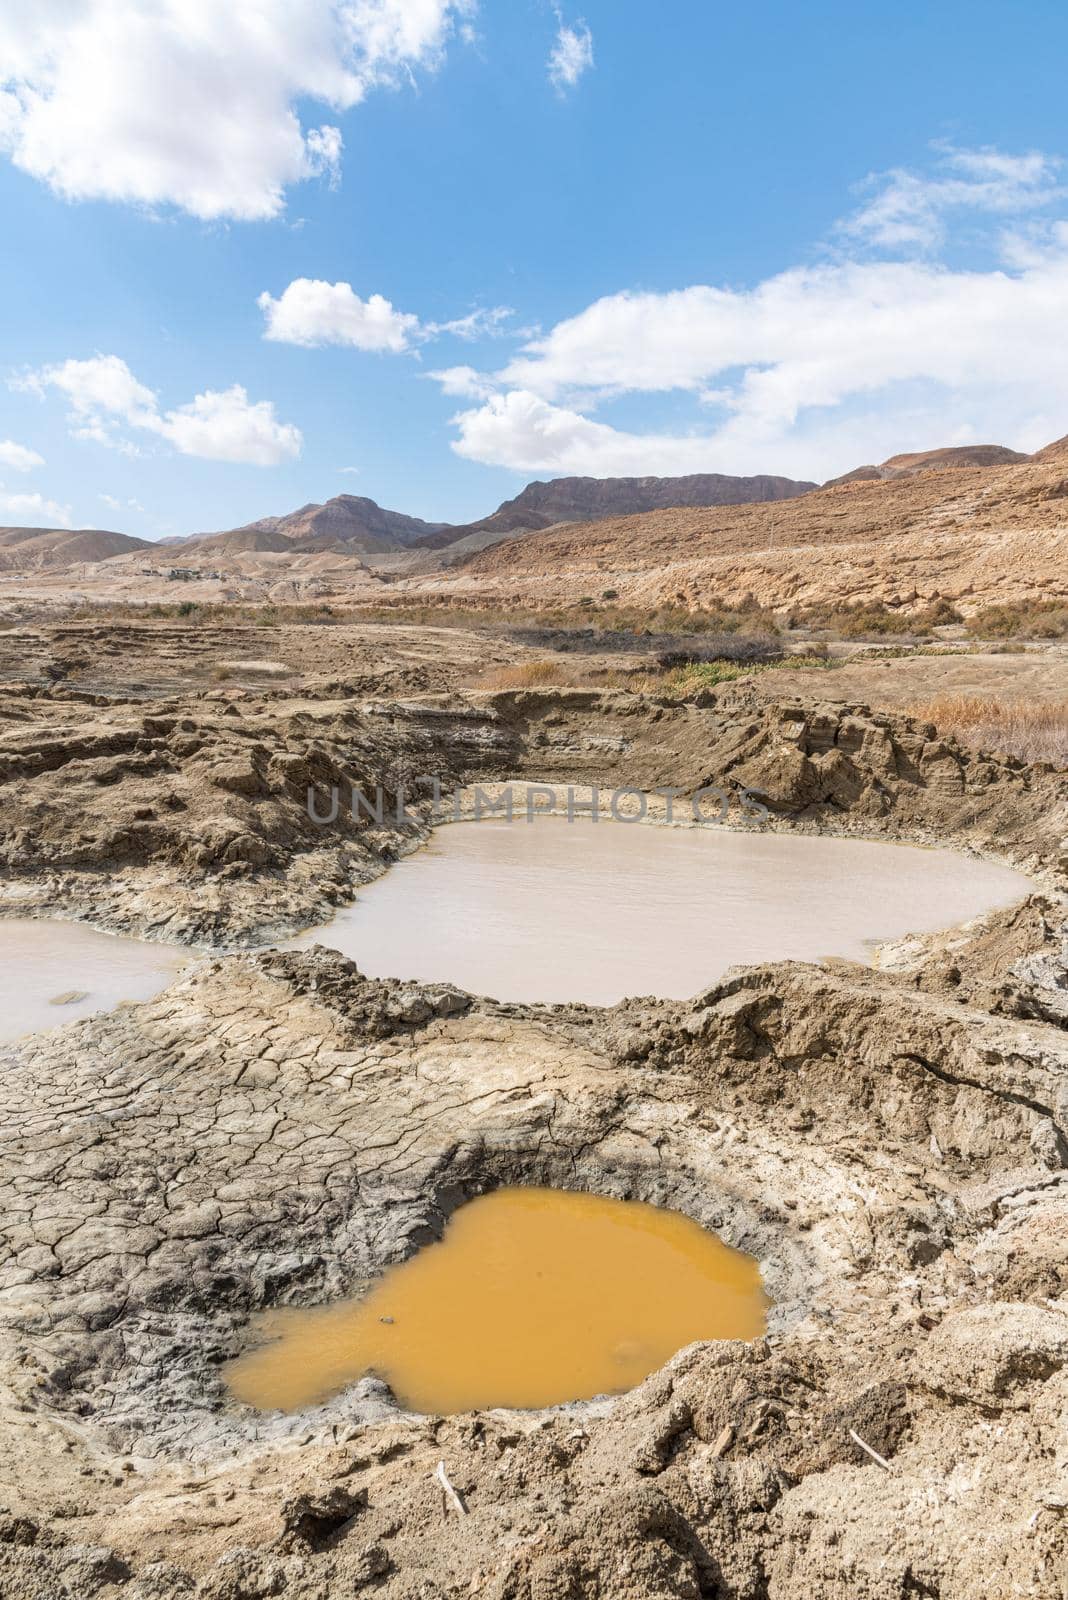 Sinkhole filled with water in different colors, near Dead Sea coastline. Hole formed when underground salt is dissolved by freshwater intrusion, due to continuing sea-level drop. . High quality photo